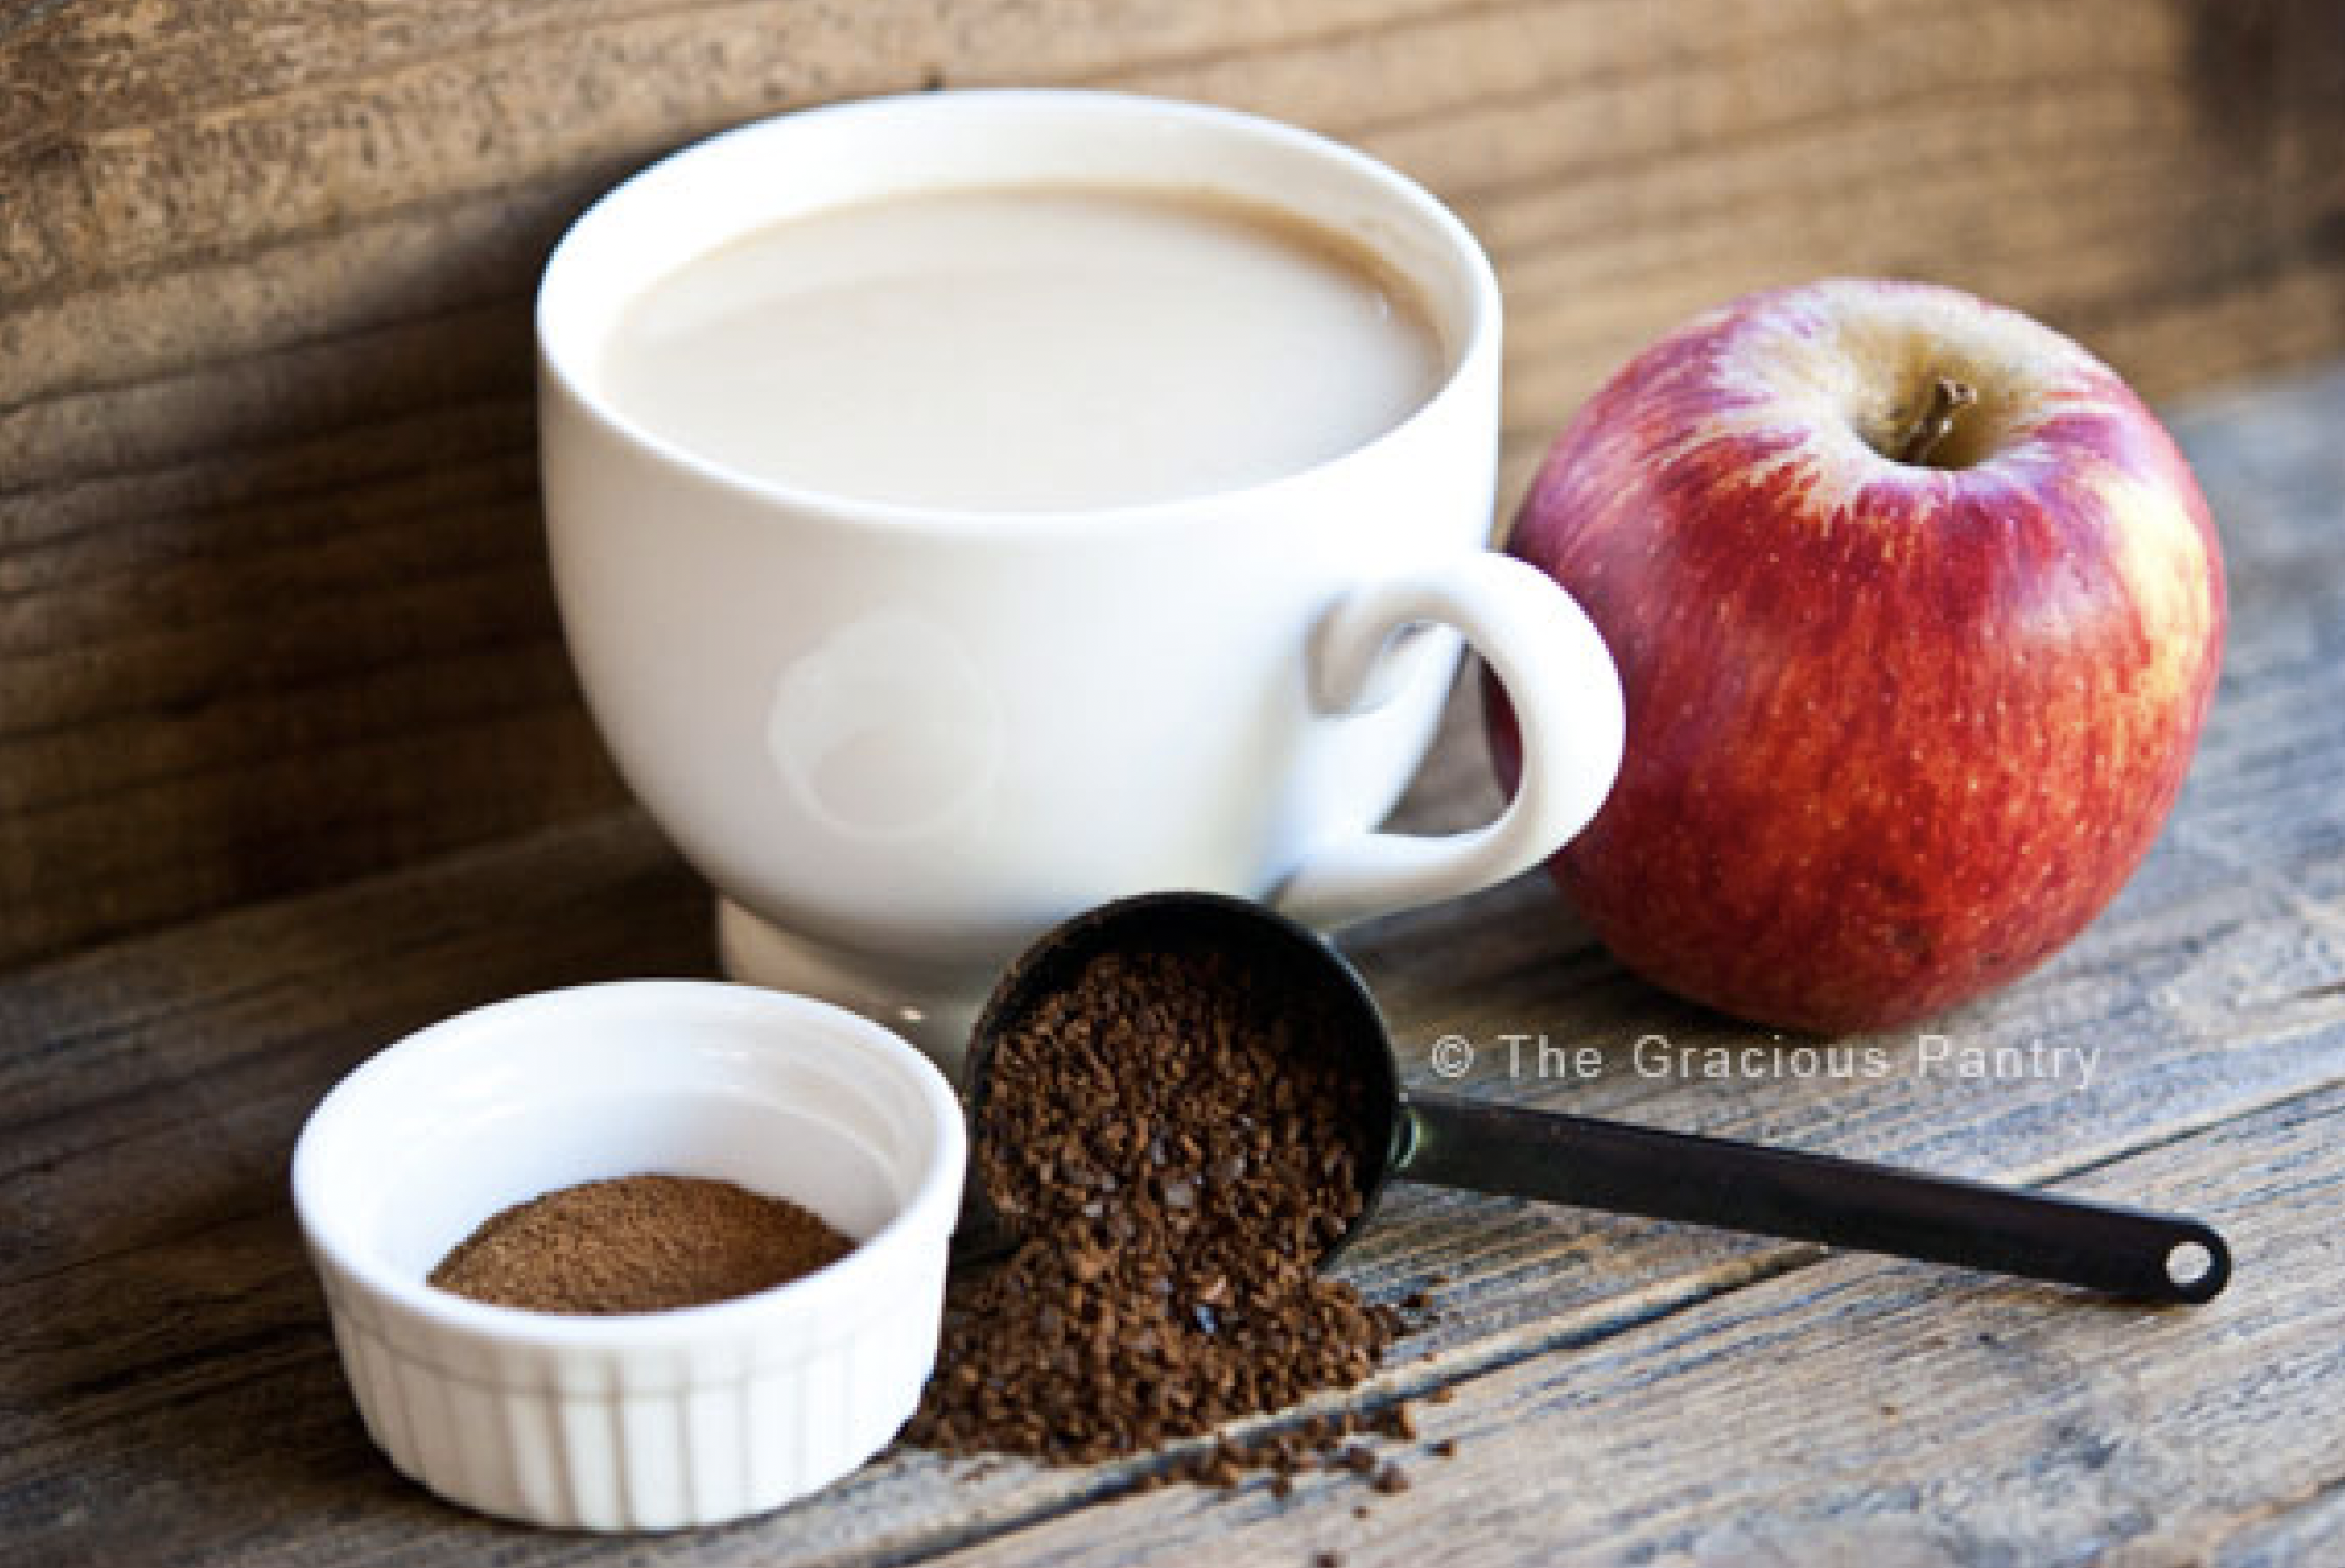 Who says fall equals pumpkin spice? This apple pie spice latte is the perfect coffee drink for fall.<p><b><a href="https://www.thegraciouspantry.com/clean-eating-apple-pie-spice-latte-recipe/">Get recipe</a></b></p>